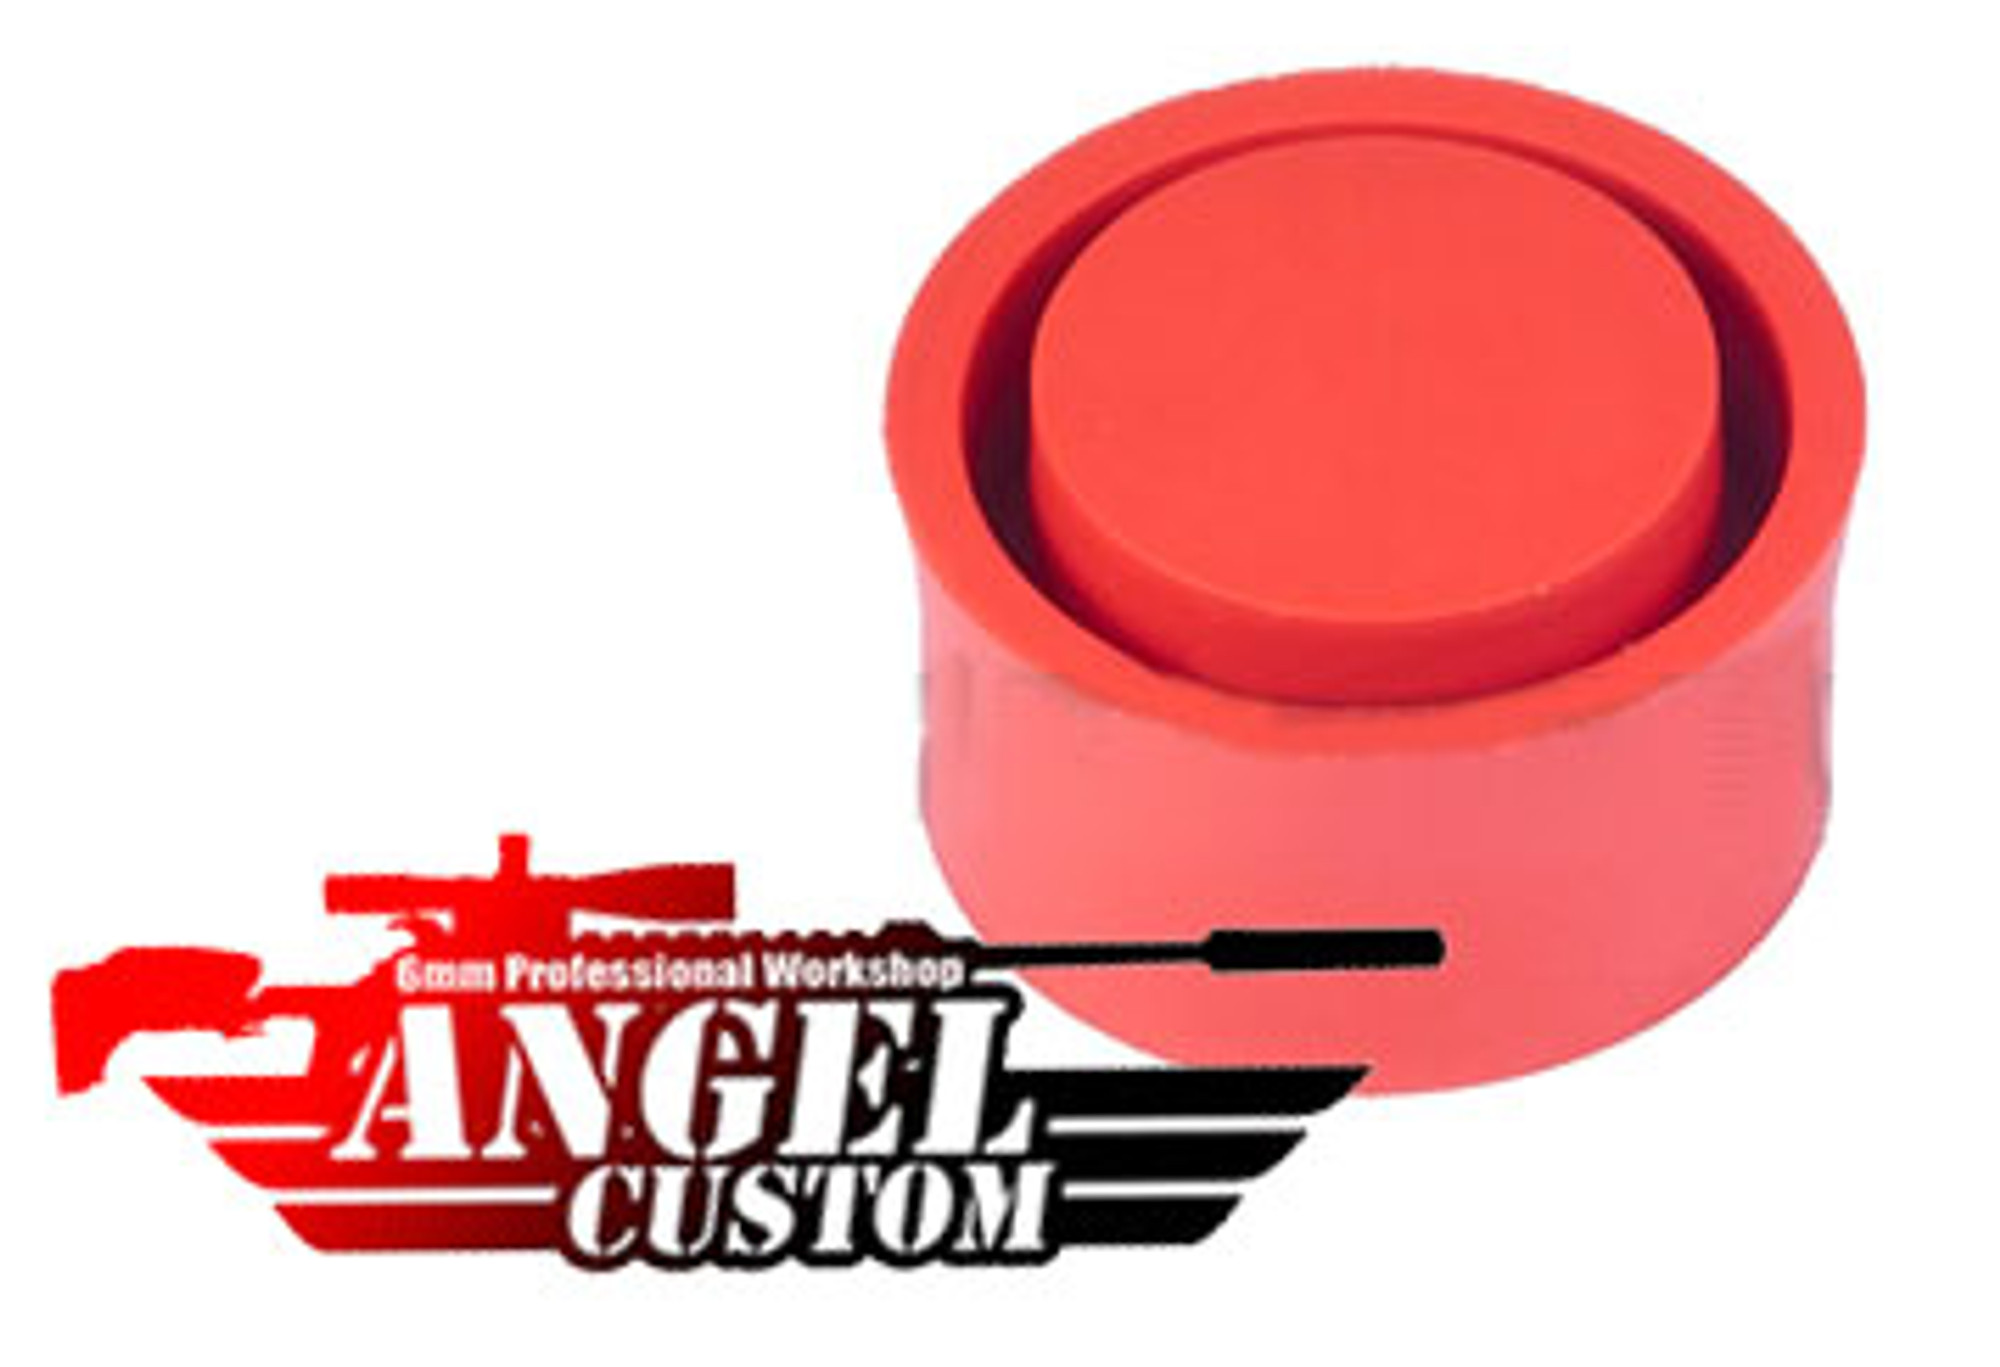 Angel Custom PSS2 Power Accuracy Piston Head for APS Type 96 Series Airsoft Sniper Rifles